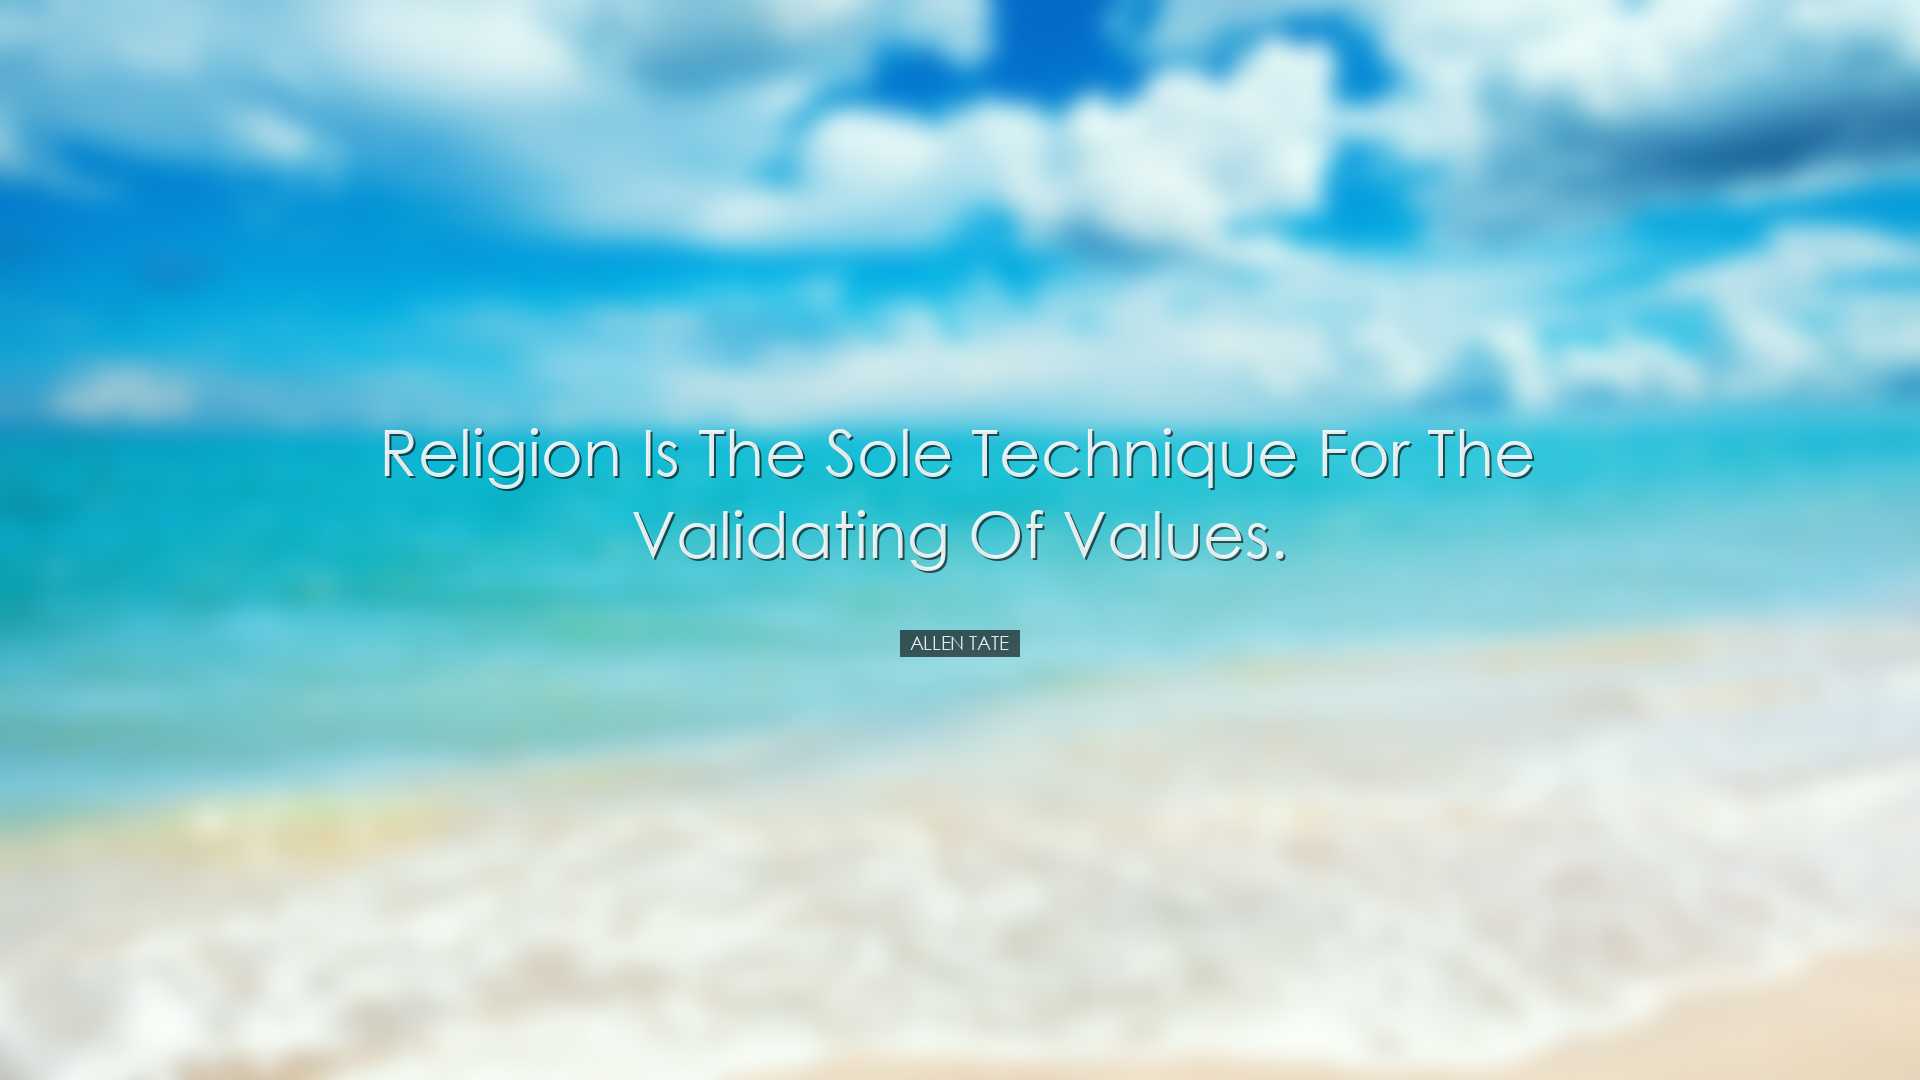 Religion is the sole technique for the validating of values. - All